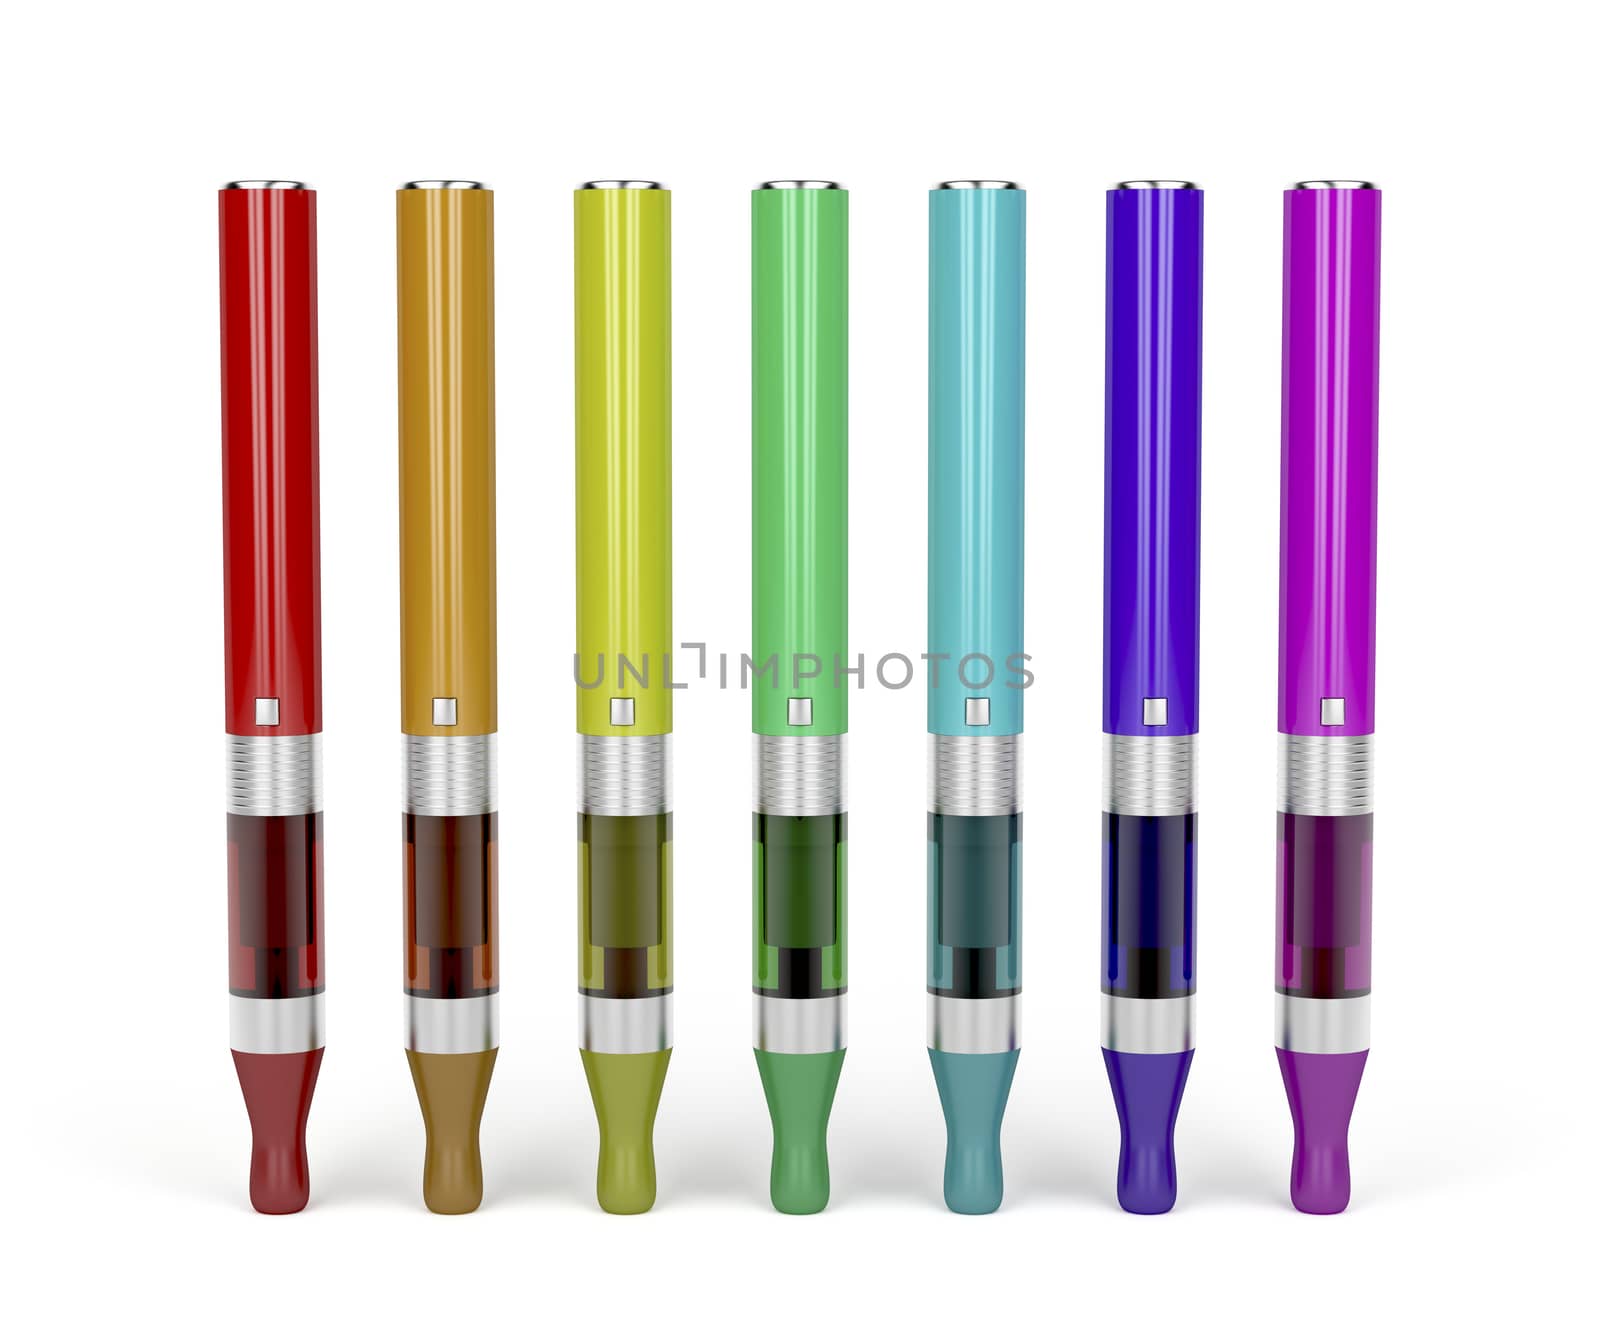 Electronic cigarettes with different colors and flavors